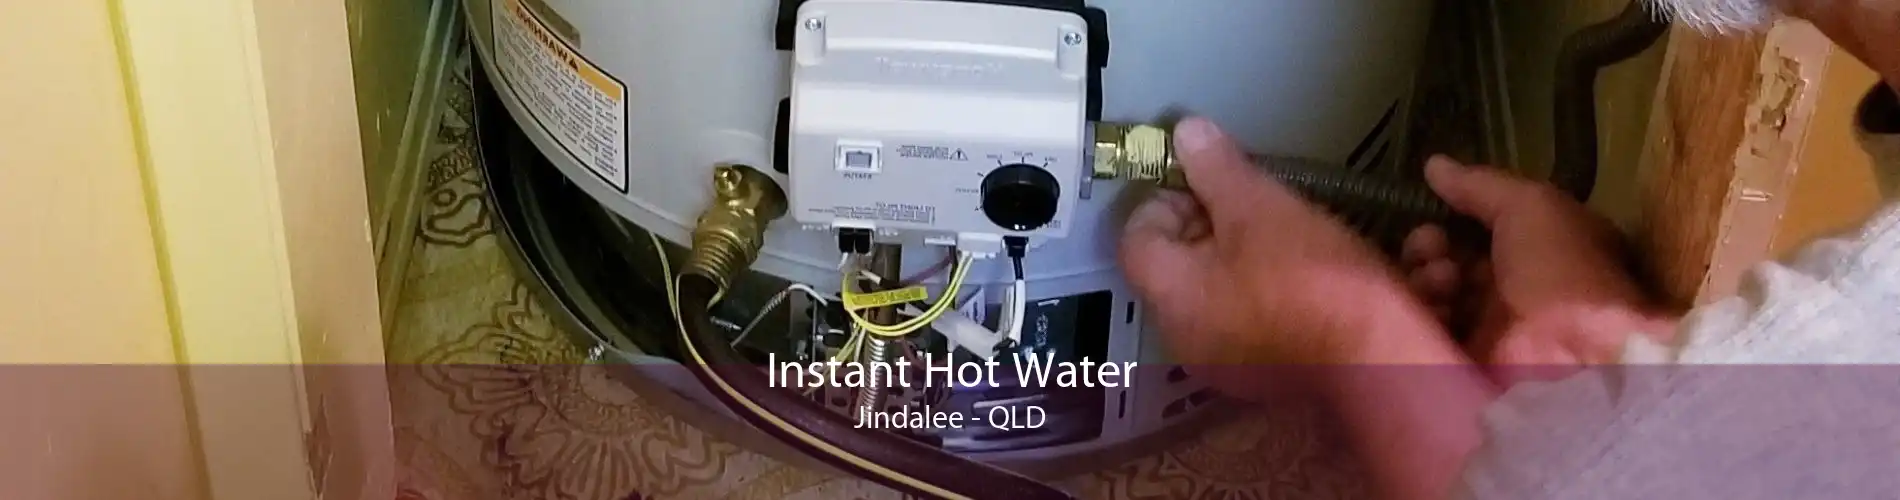 Instant Hot Water Jindalee - QLD